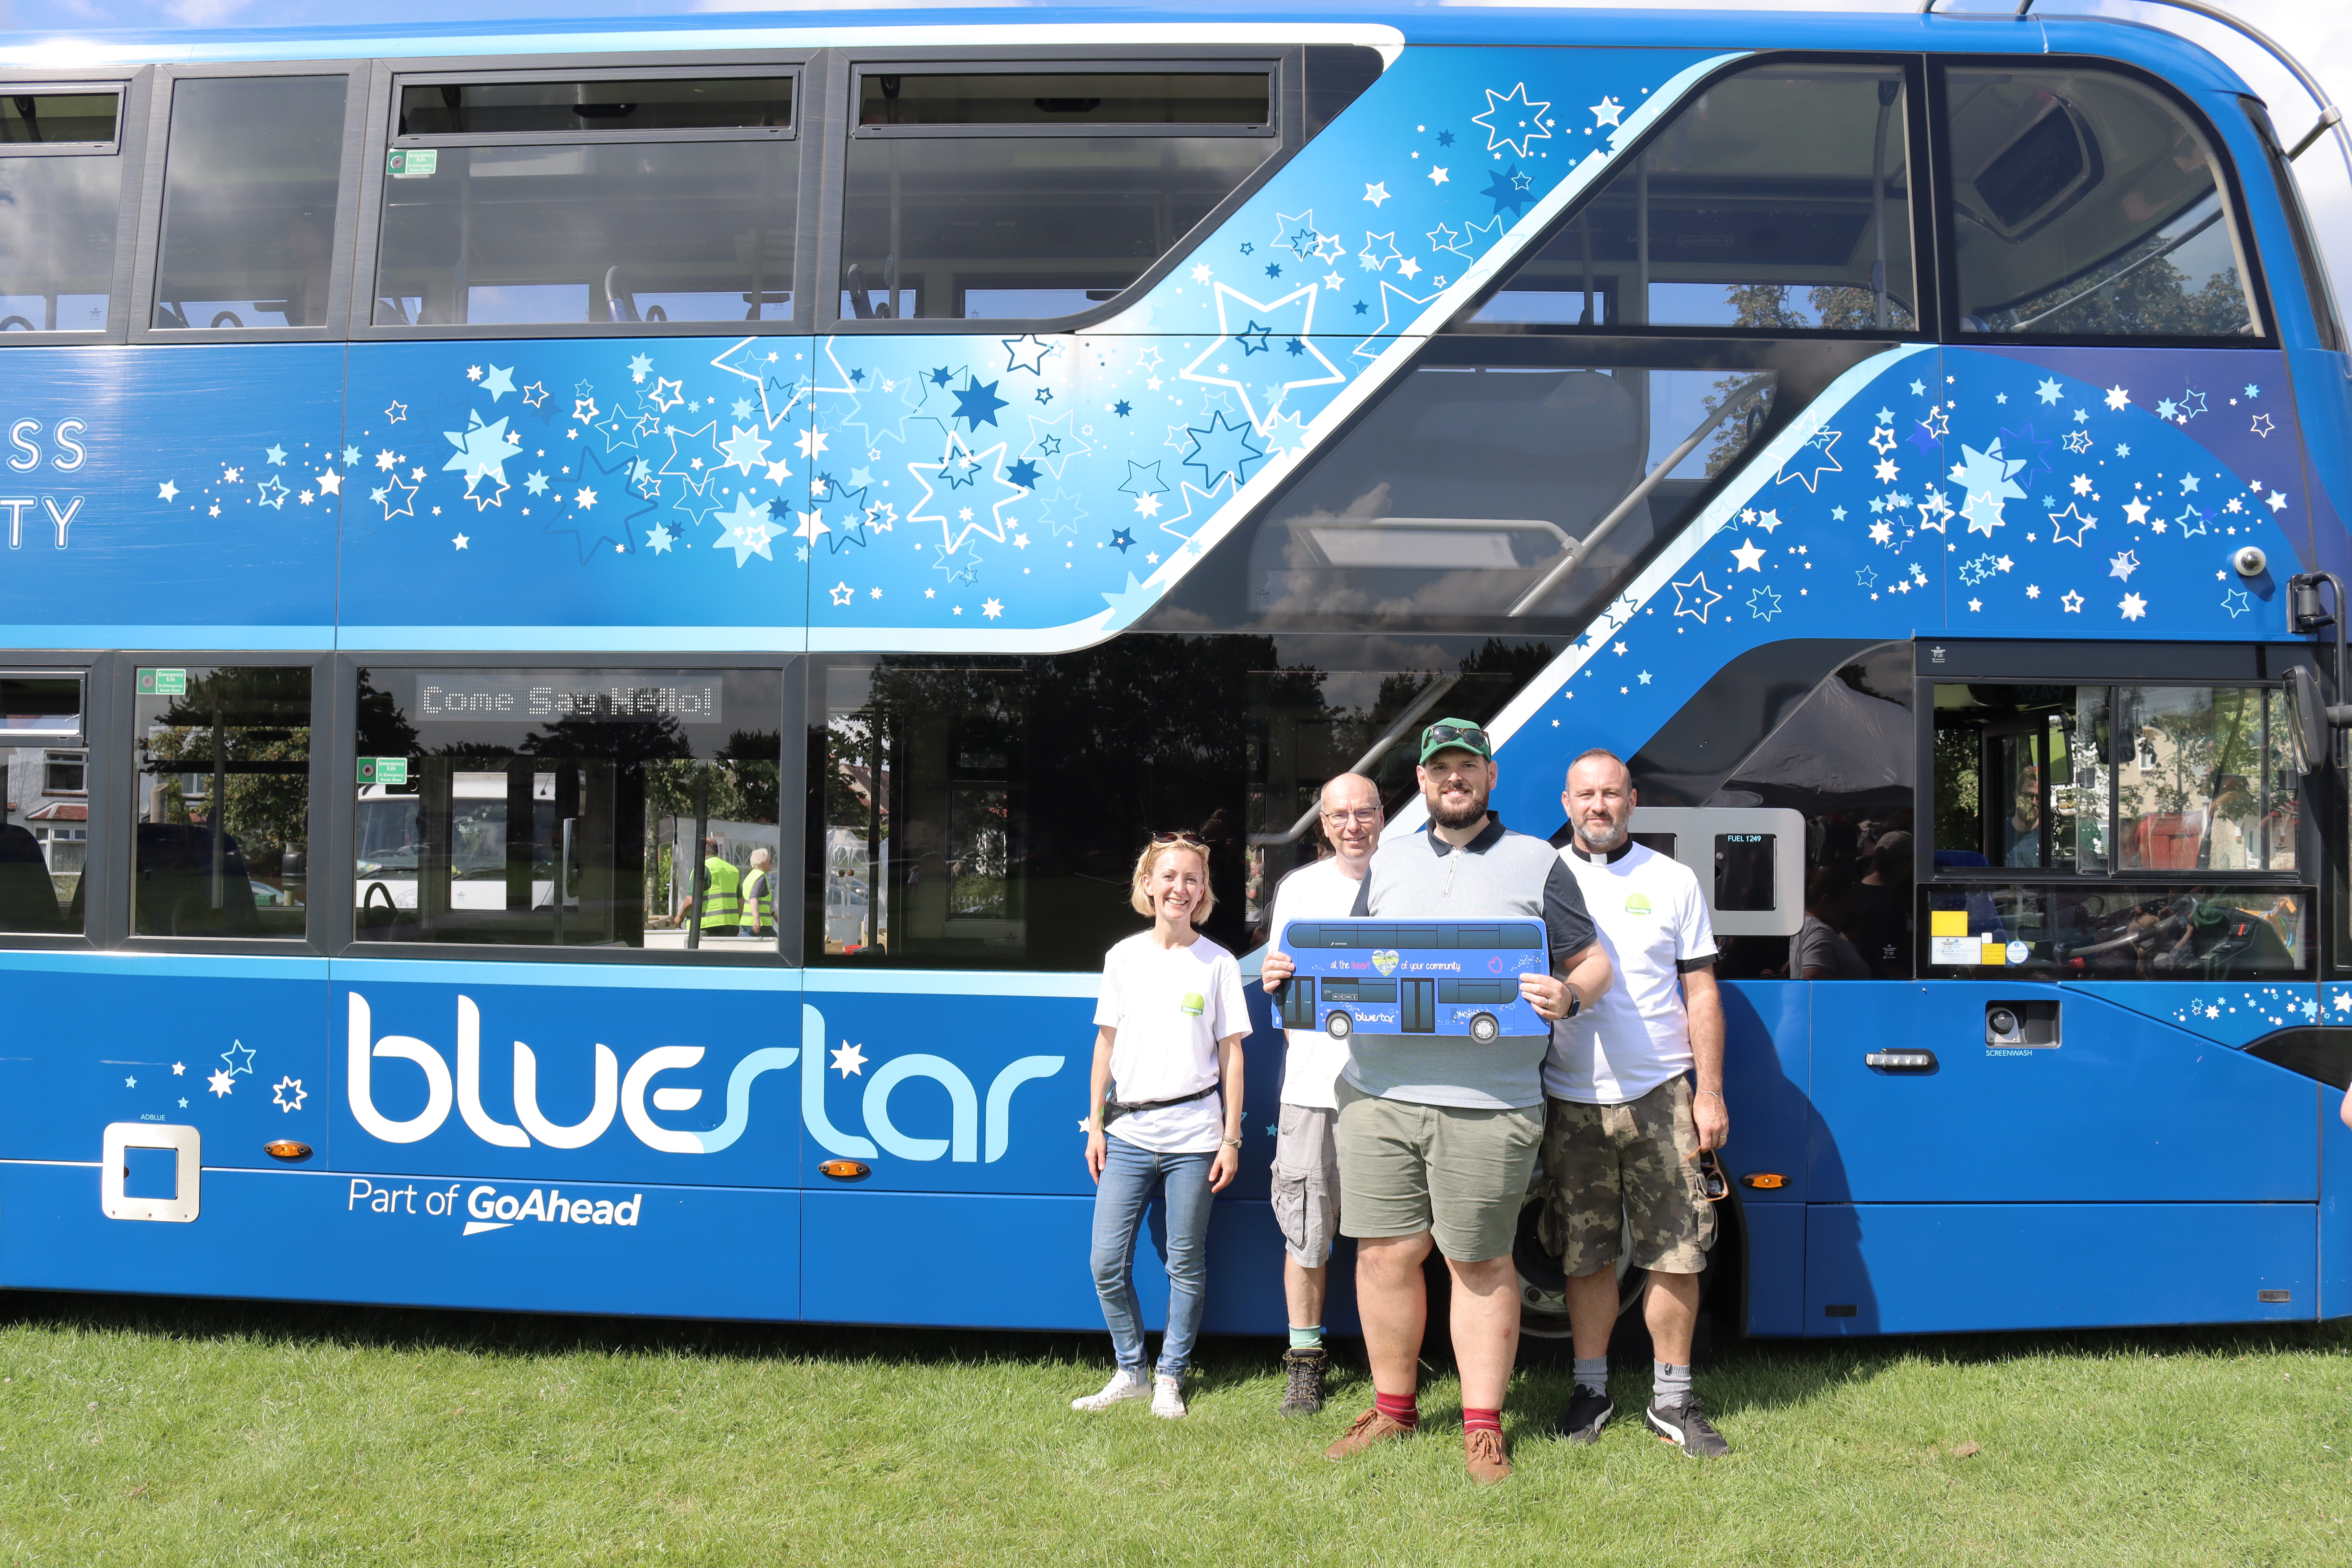 People stood next to Bluestar bus holding a bus cutout